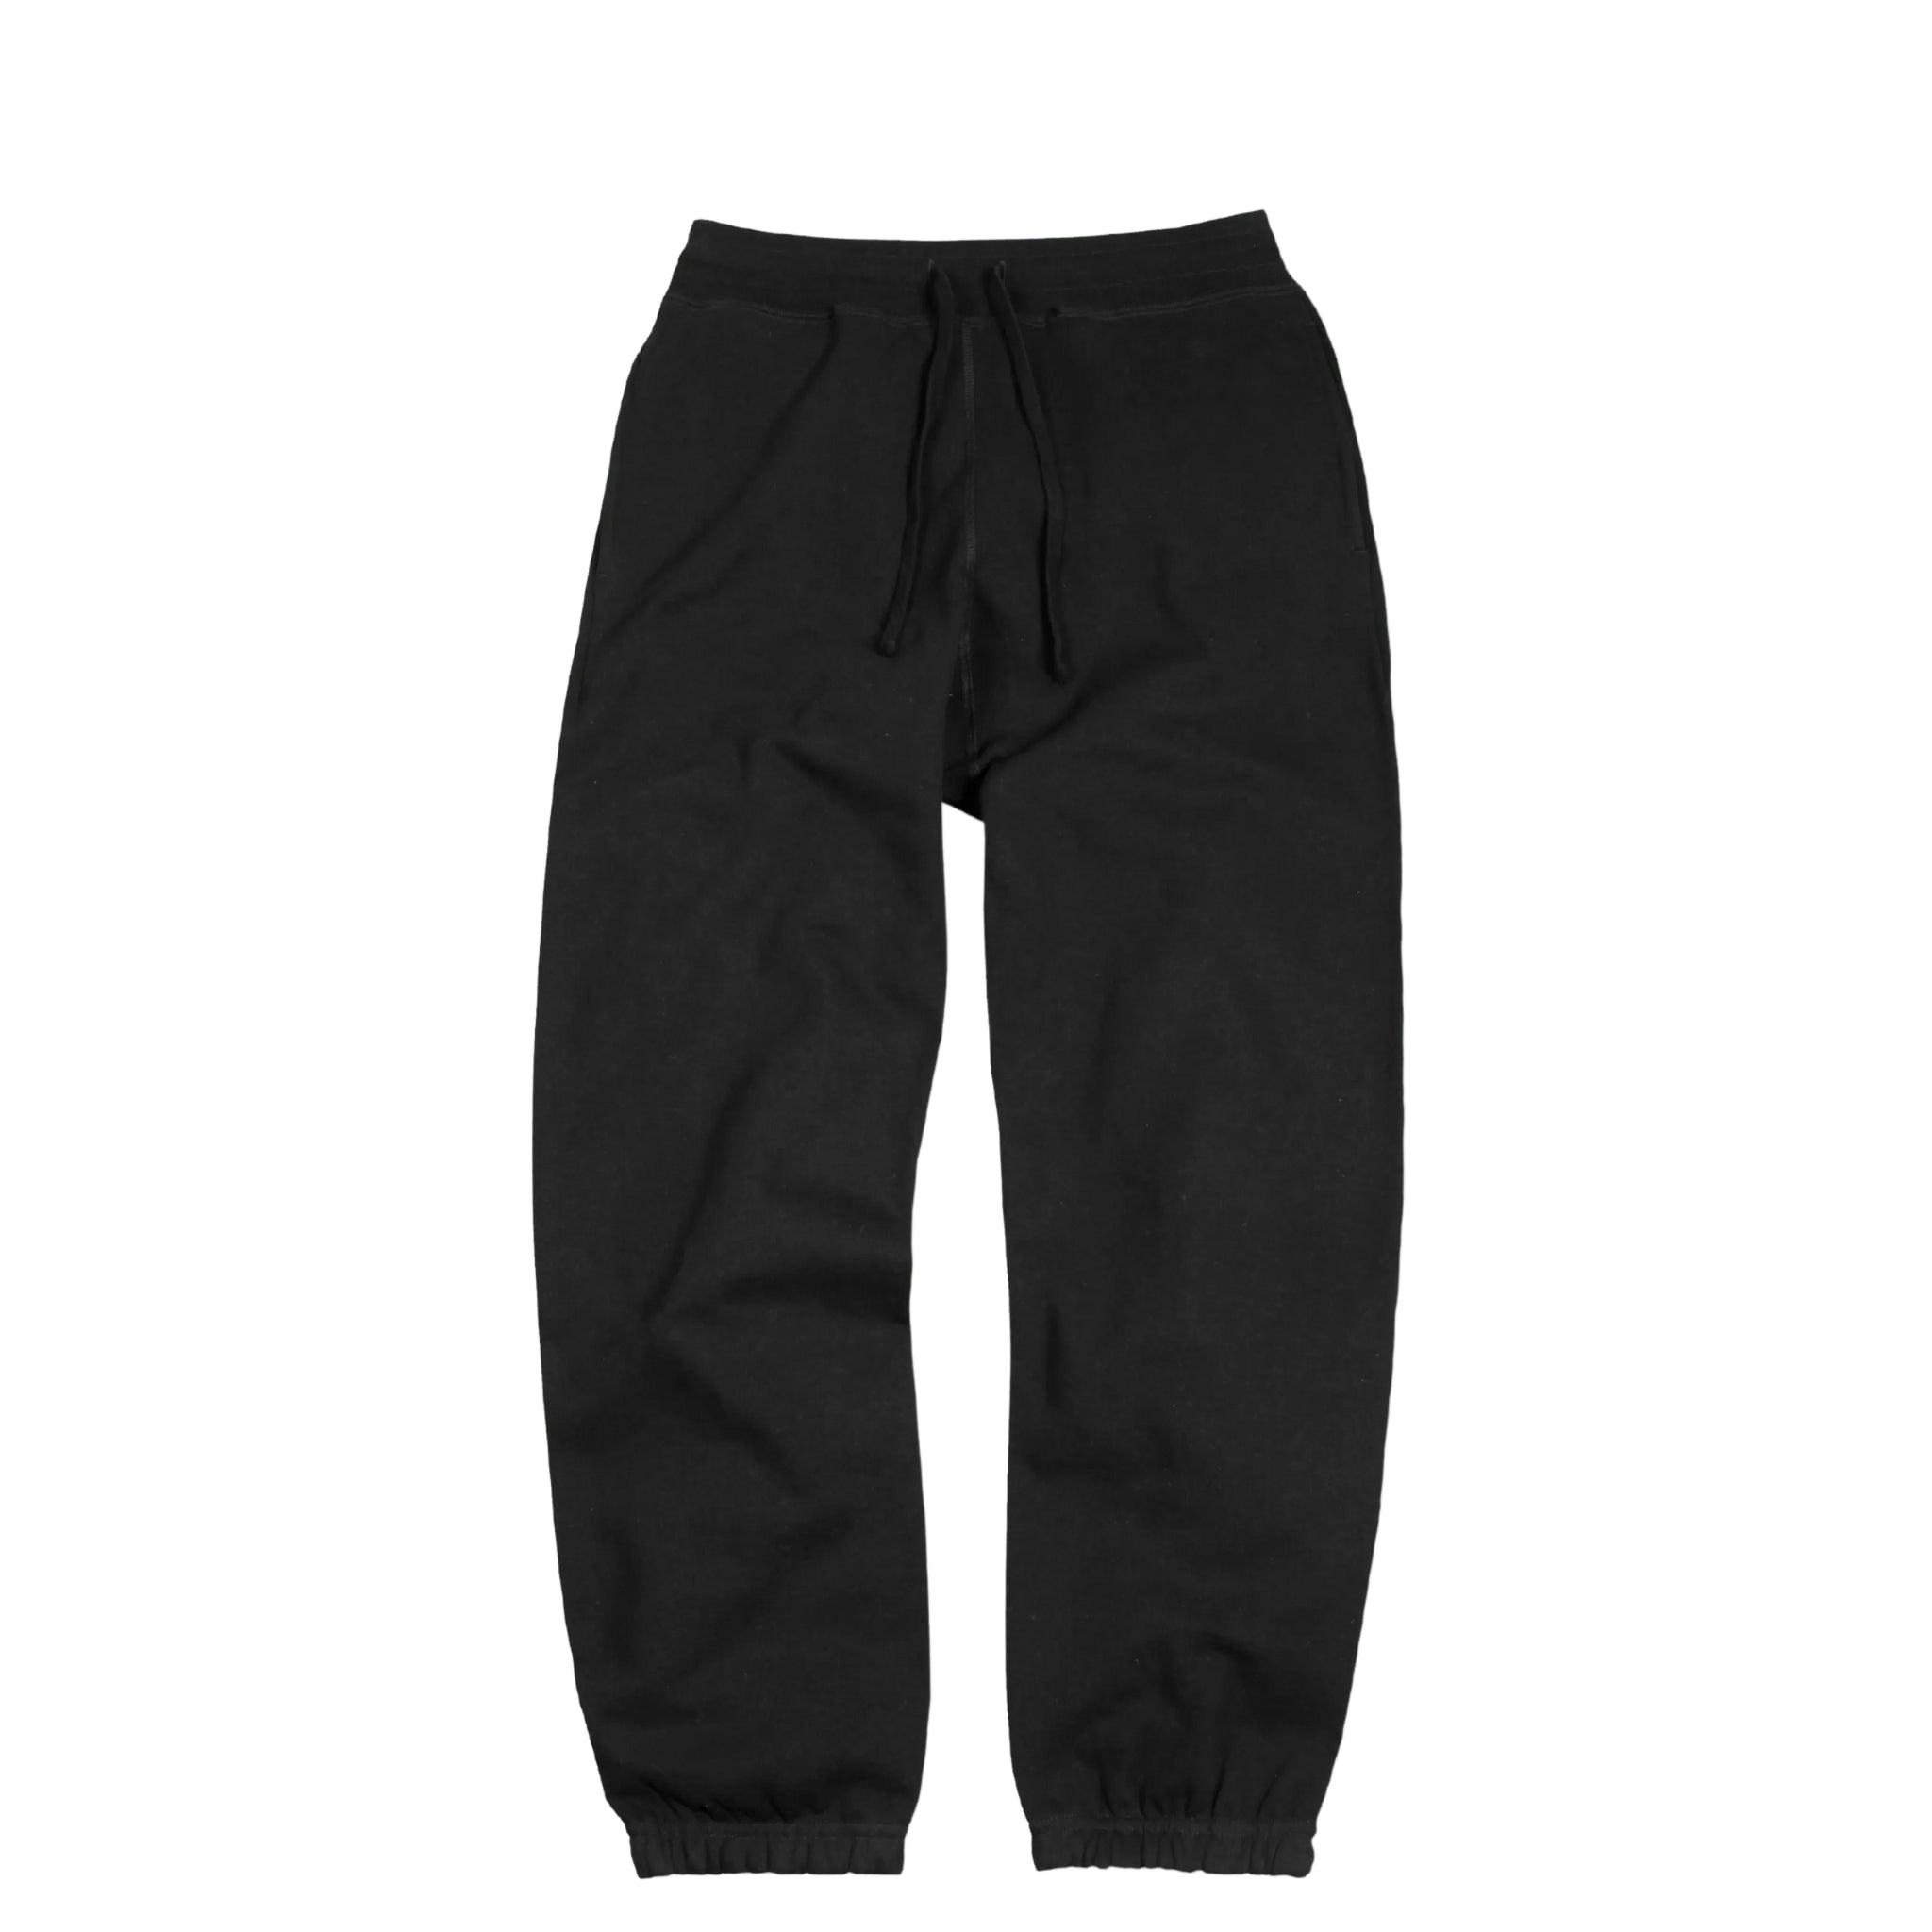 white view of black heavyweight knit joggers against white background